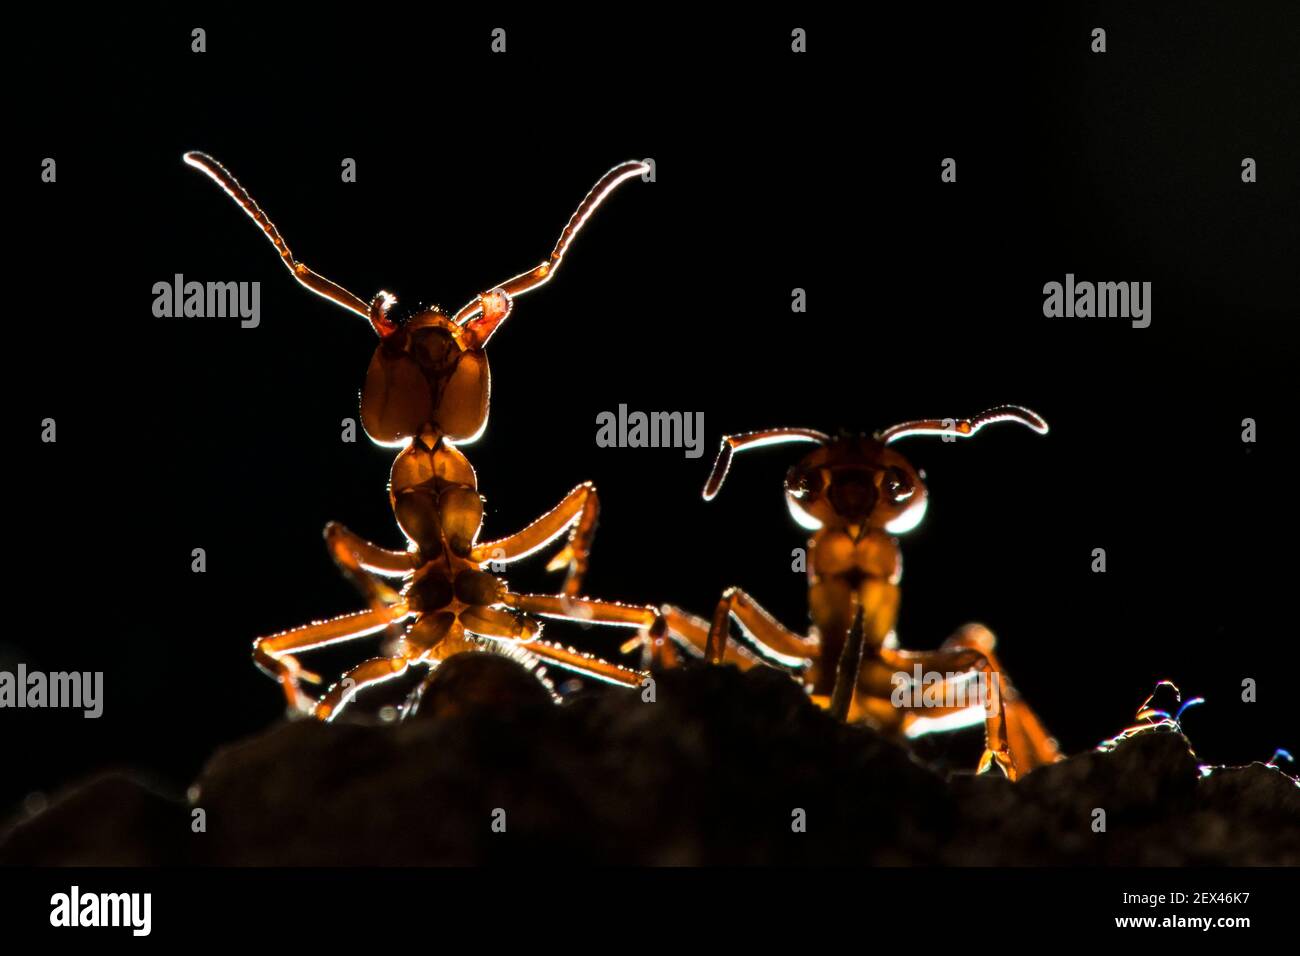 European Red Wood Ant (Formica polyctena) in backlight, Lorraine, France Stock Photo